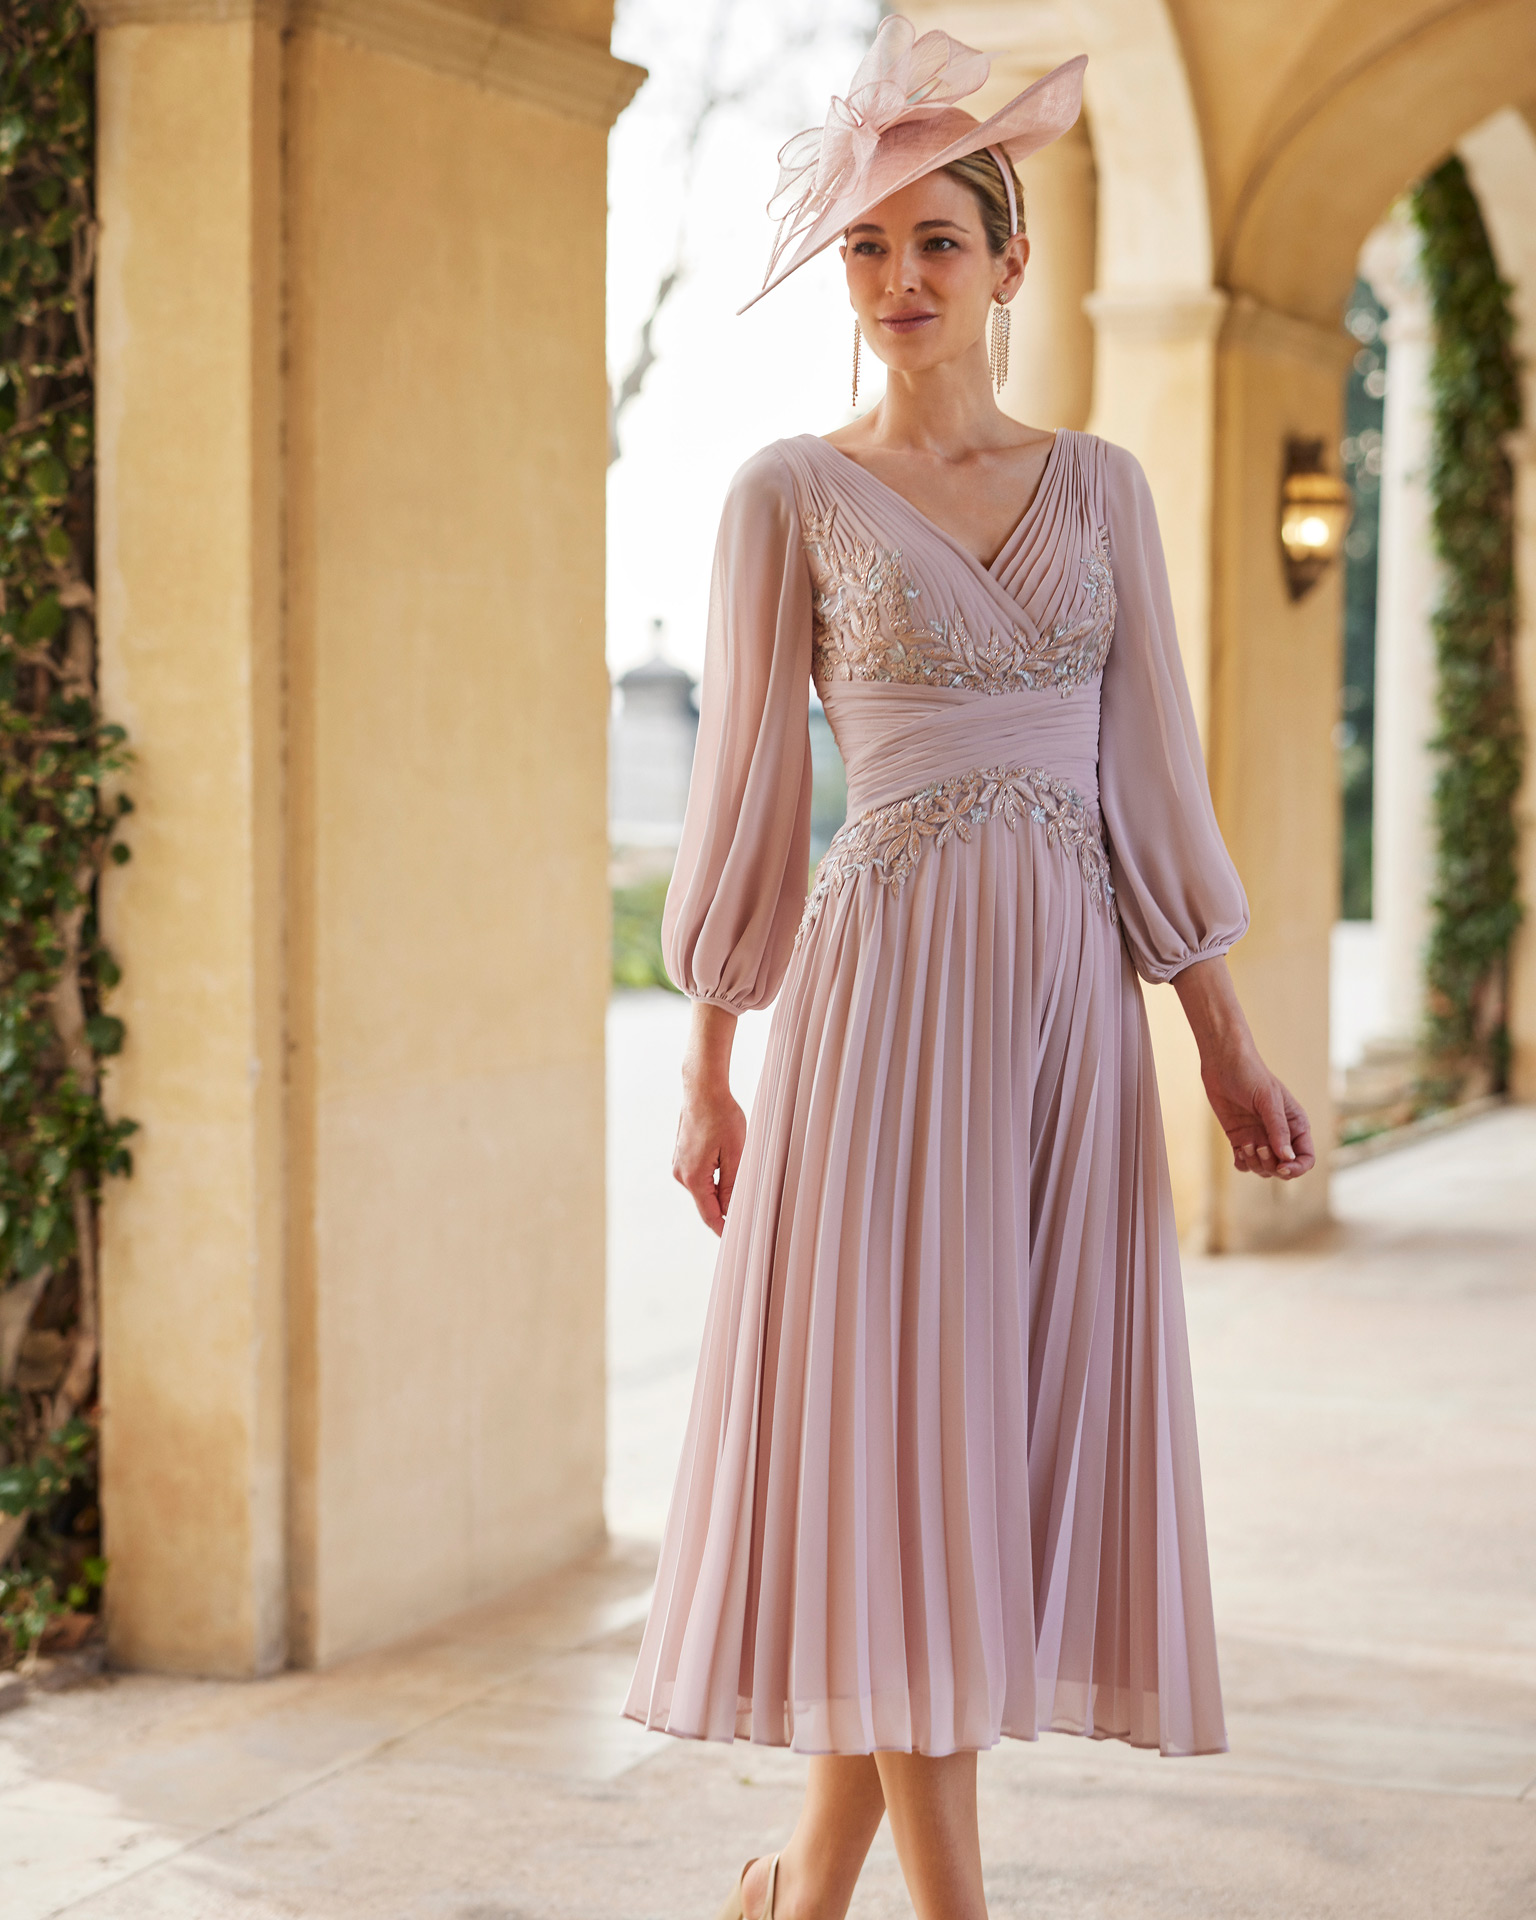 Flowing midi guest dress. Crafted with georgette combined with beadwork lace. With V-neckline and V-back with puffed sleeves. Couture Club outfit. MARFIL_BARCELONA.